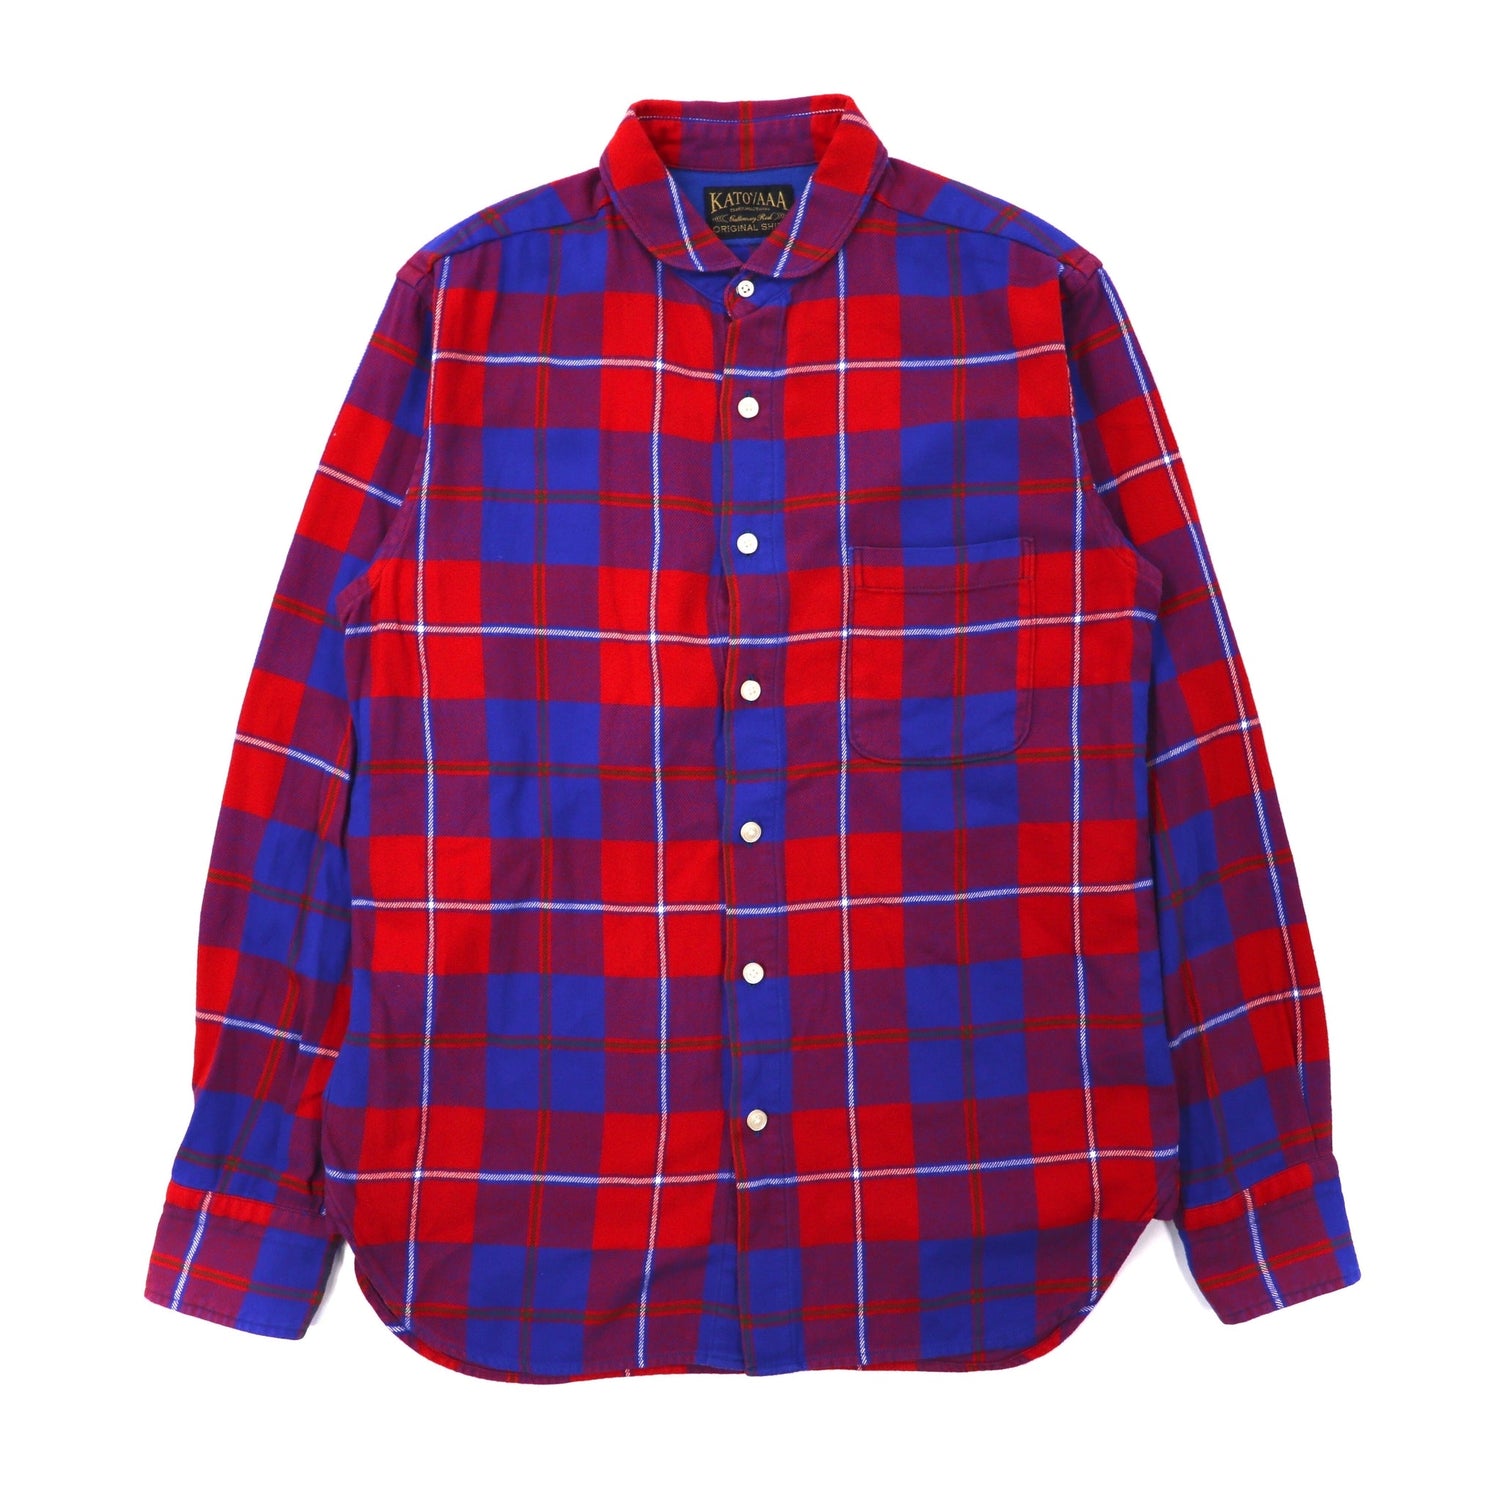 KATO ' / AAA FLANNEL SHIRT S Red CHECKED